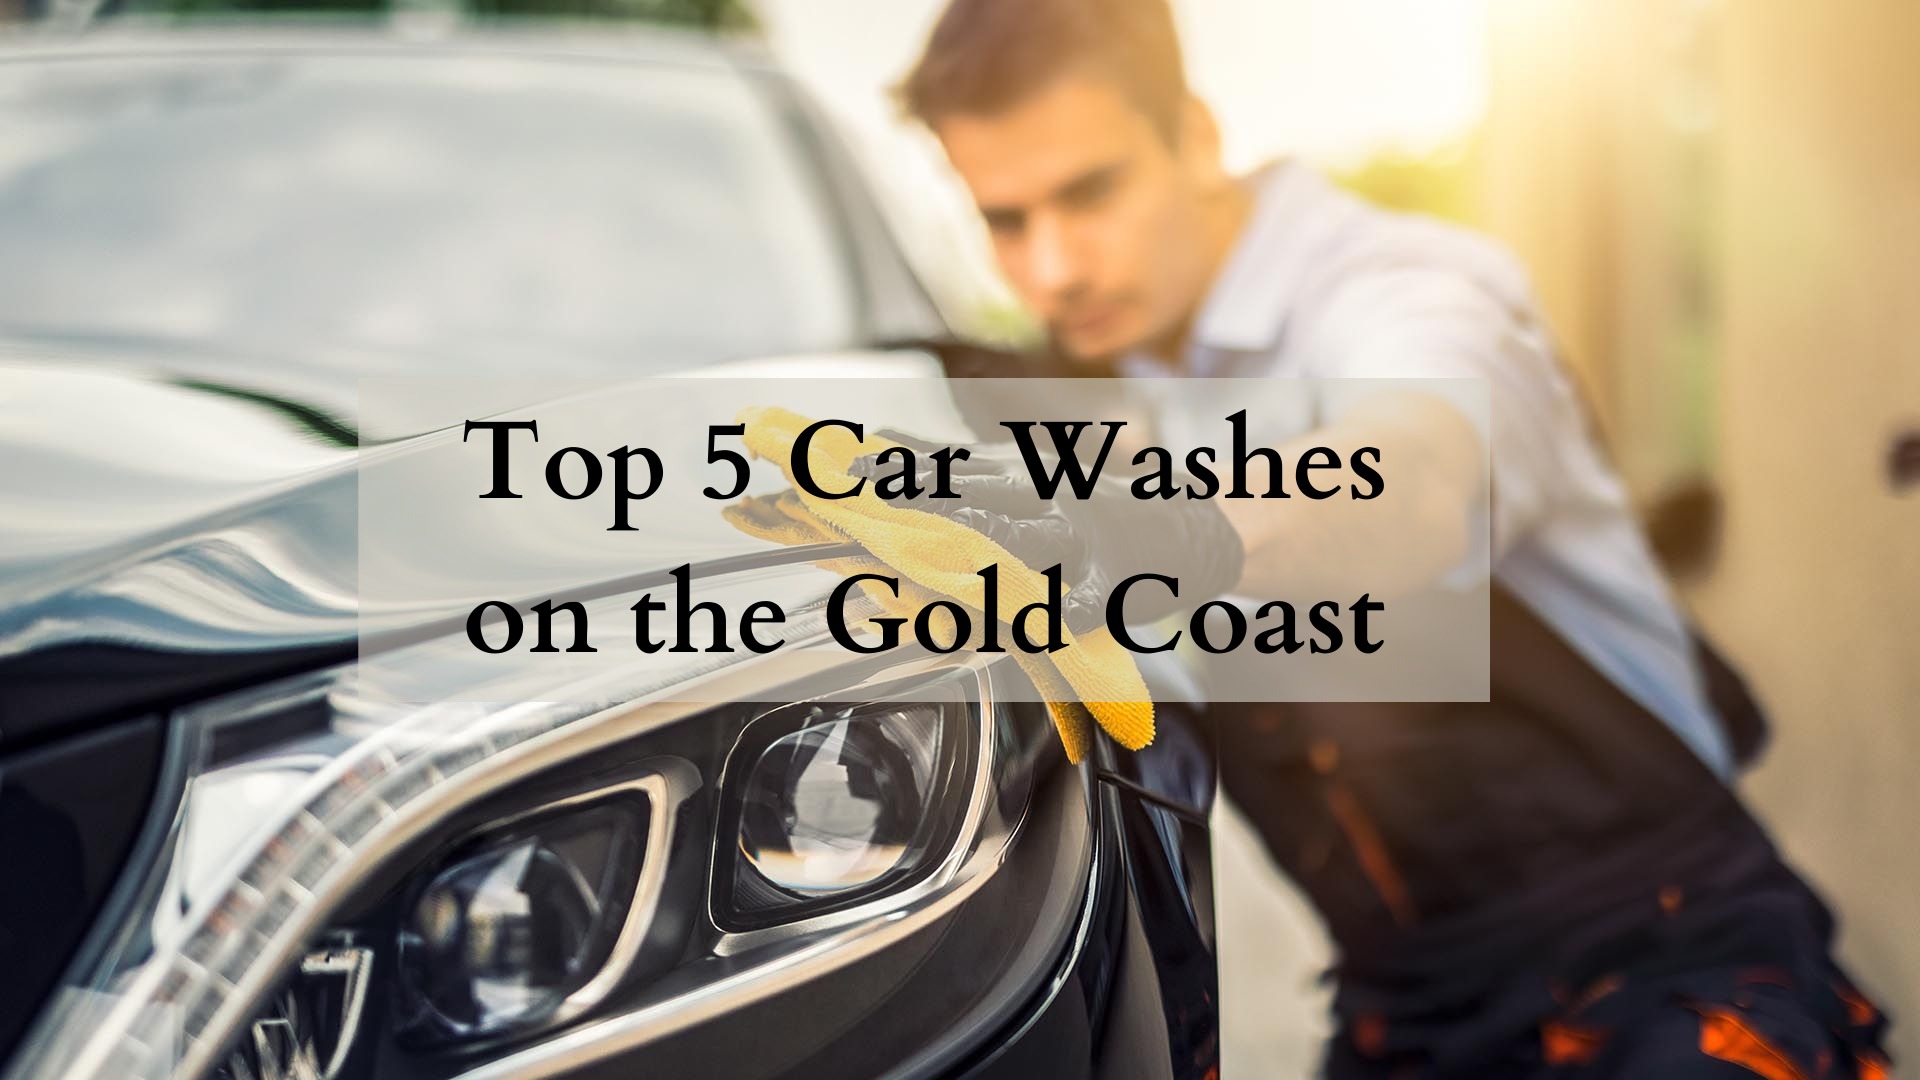 Top 5 Car Washes on the Gold Coast